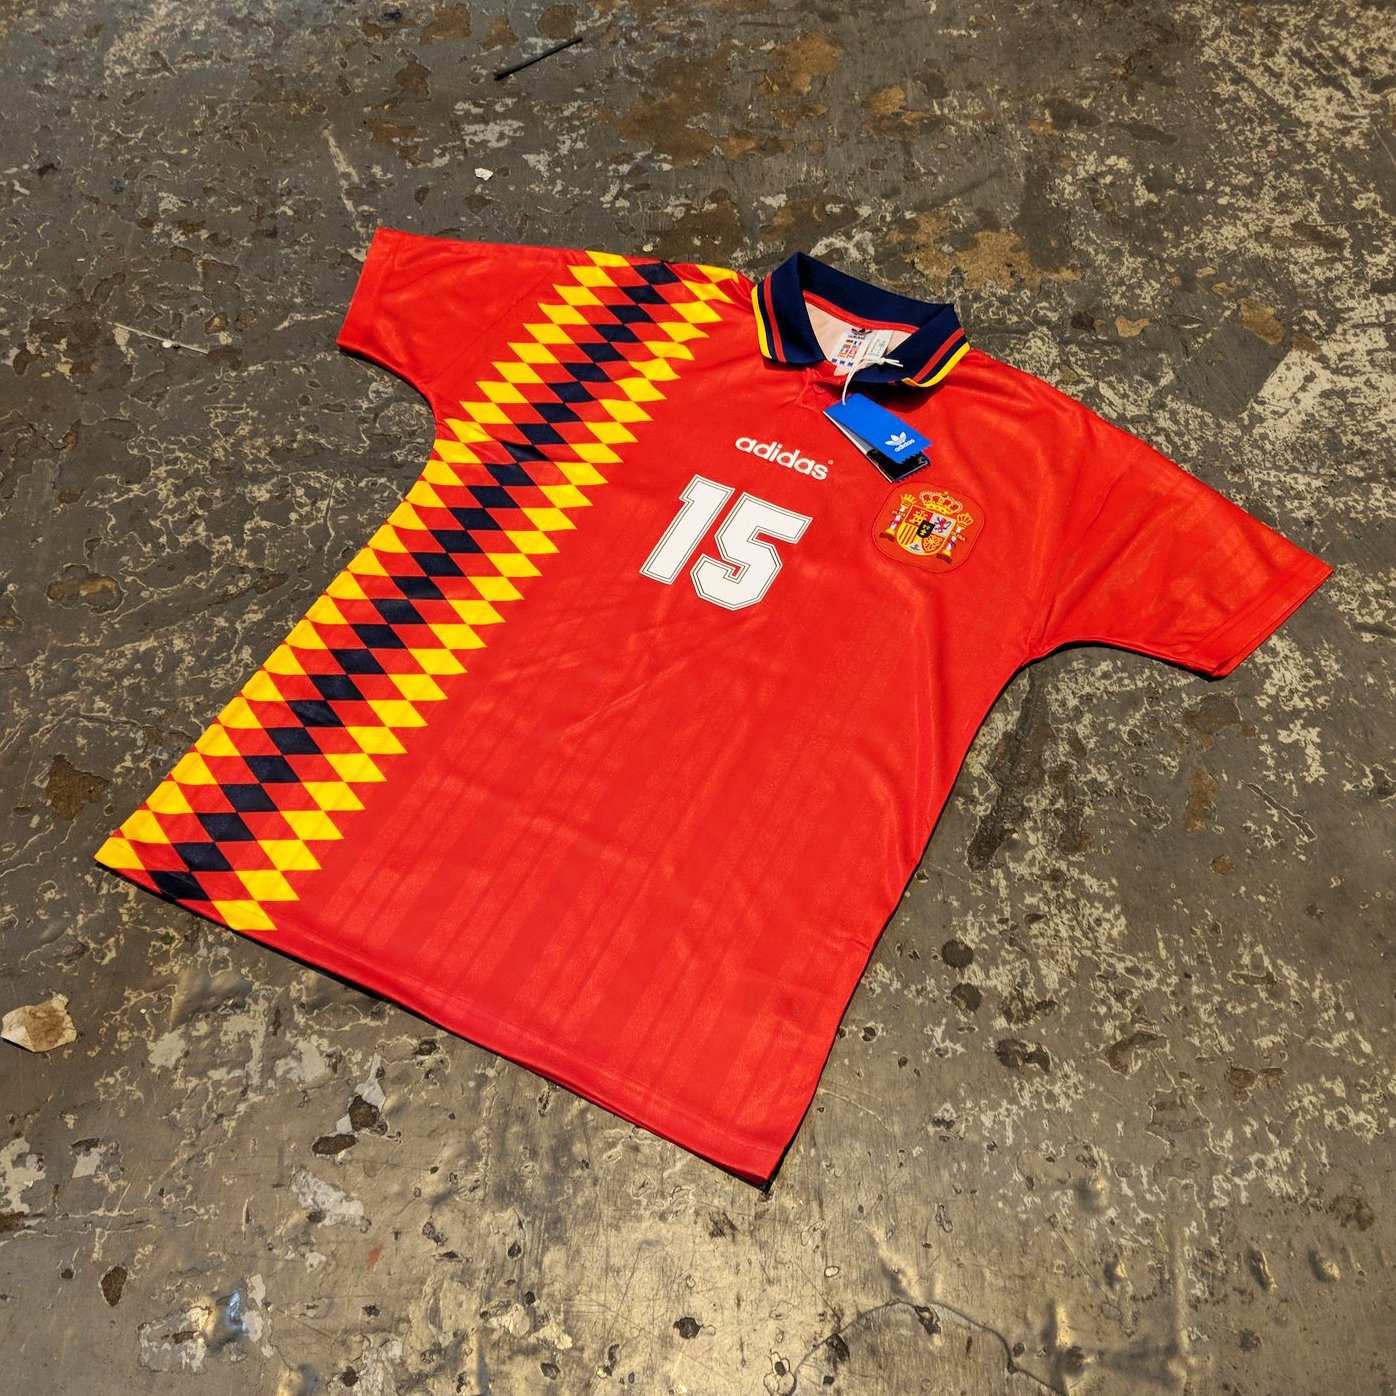 Football Shirts on Twitter: "New in: Spain Adidas Get yours now - https://t.co/ghGPbhXMbm https://t.co/YH9Qs3Q78w" / Twitter